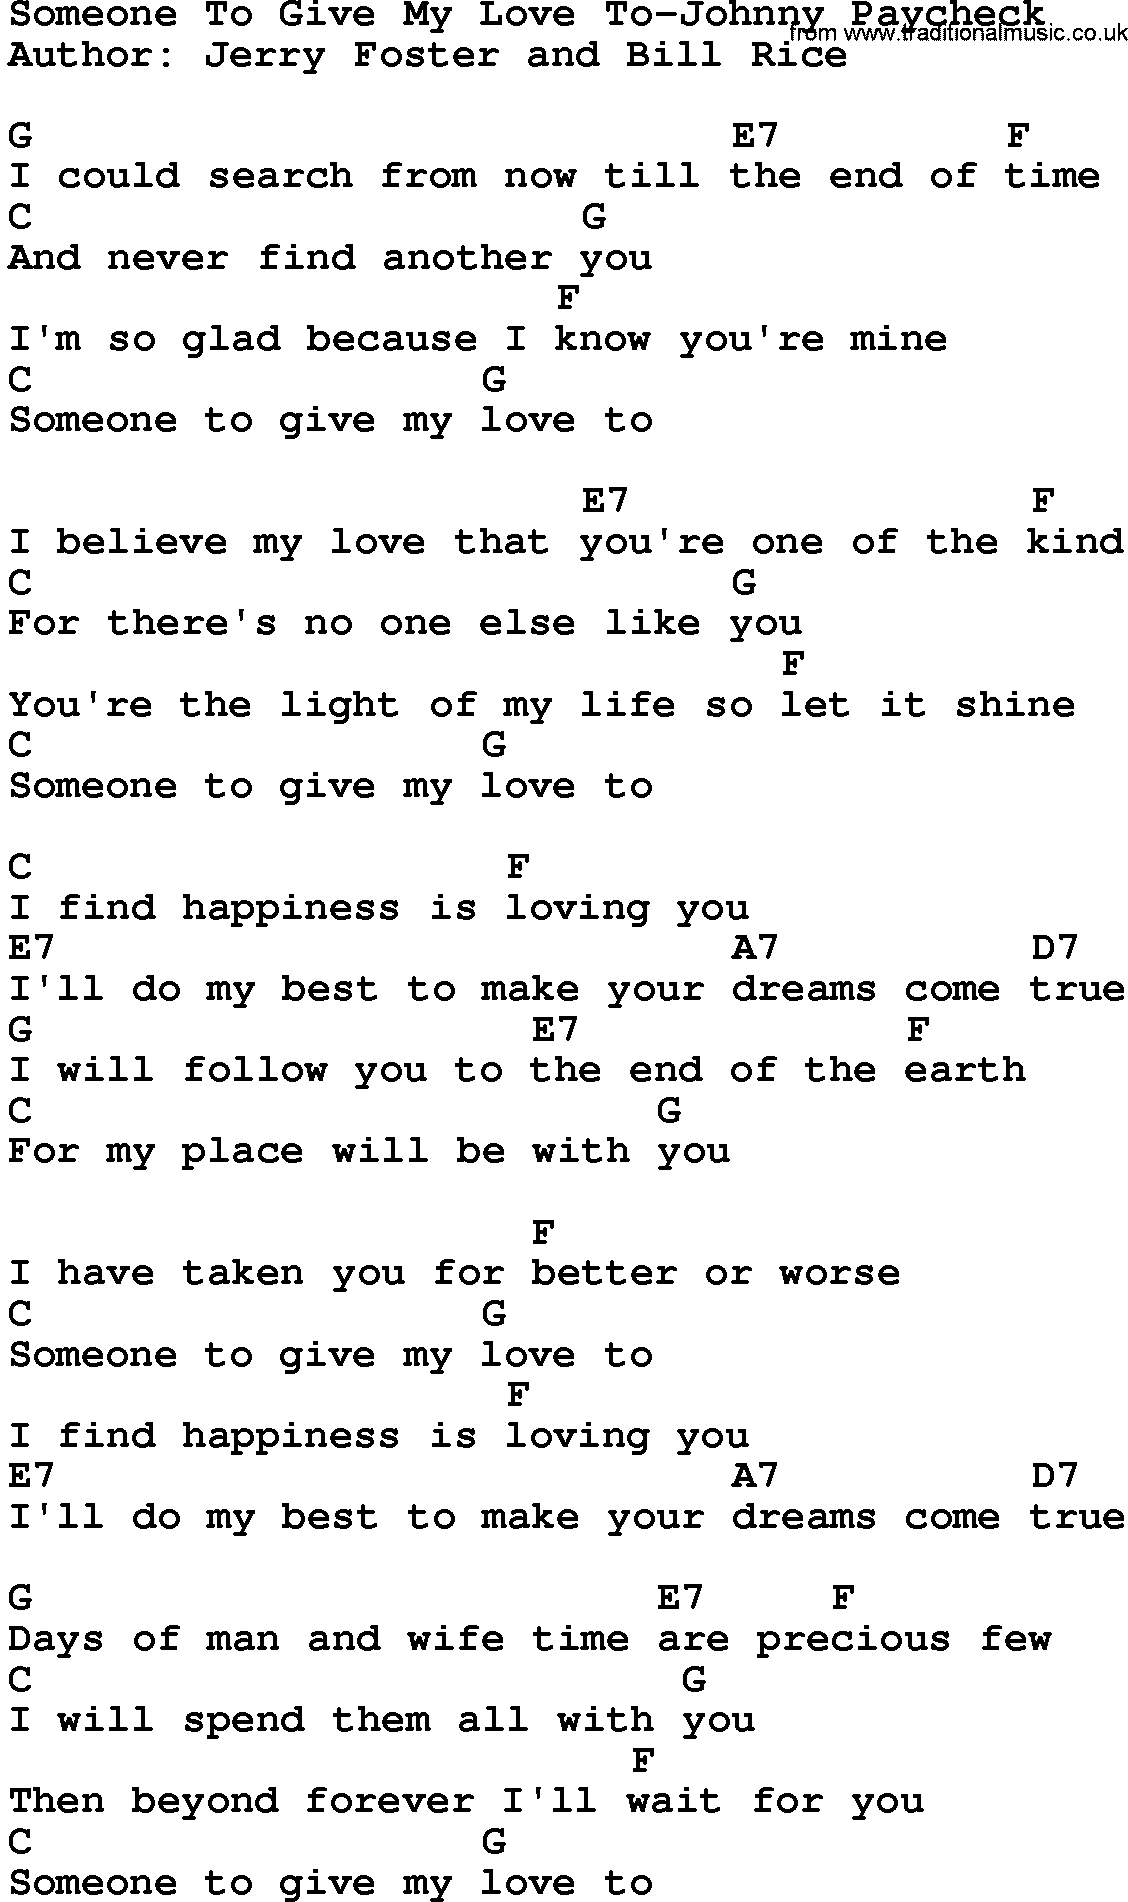 Country music song: Someone To Give My Love To-Johnny Paycheck lyrics and chords